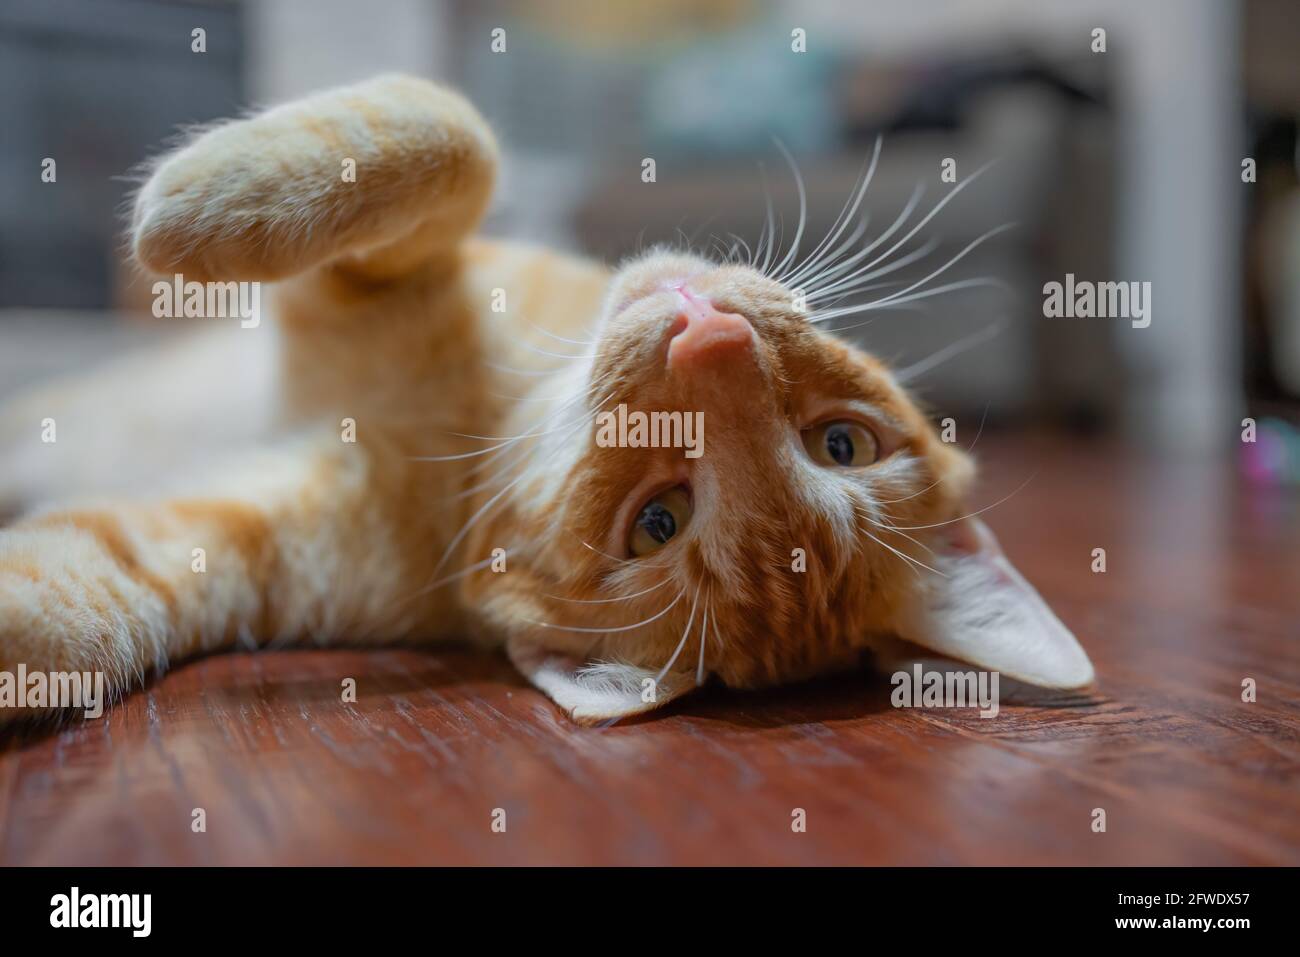 Cat face and paw Laying upside down Stock Photo